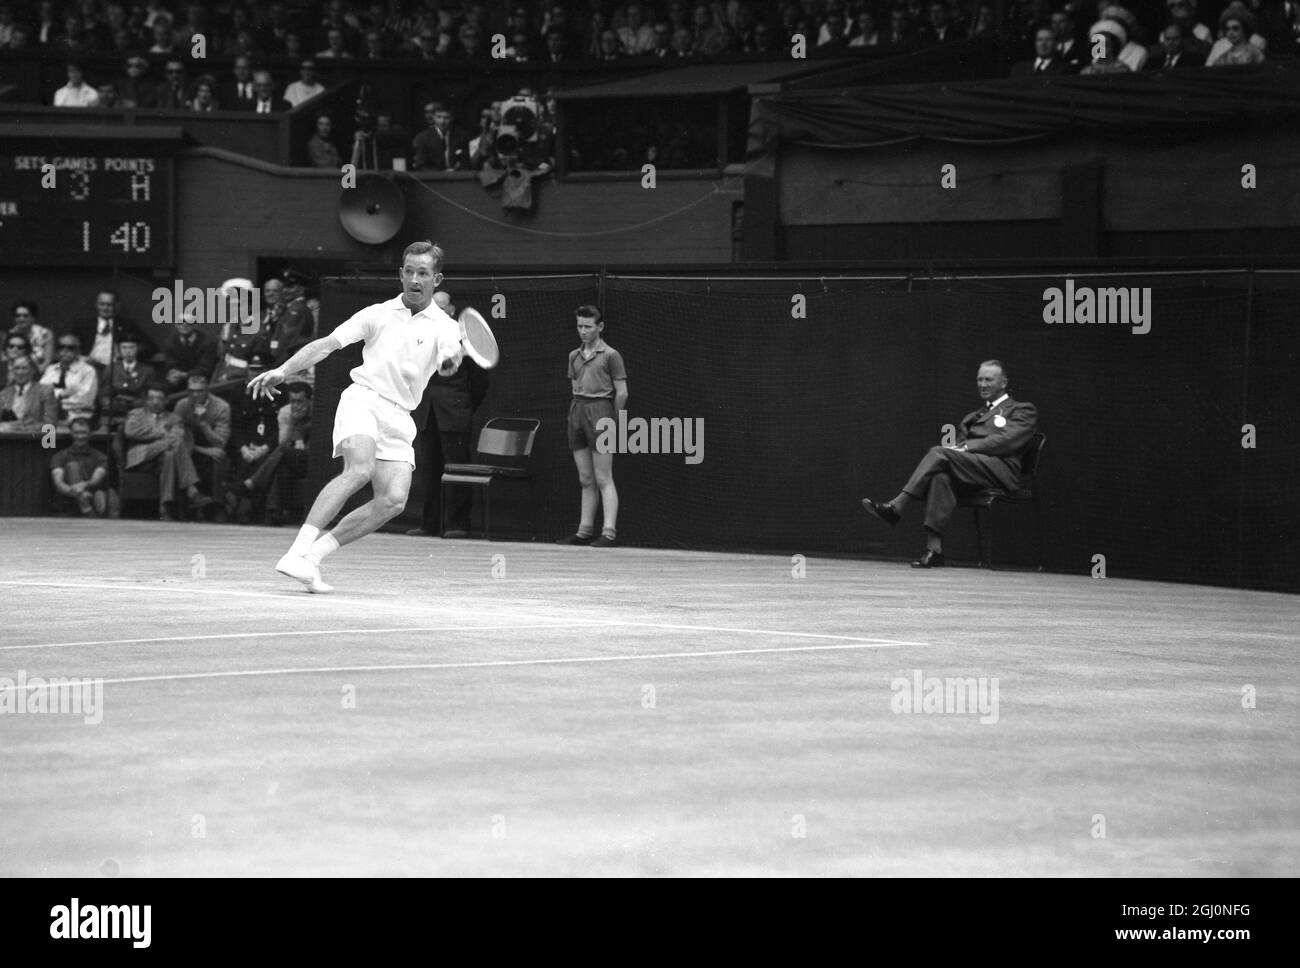 Reigning Wimbledon champion , Rod Laver , of Australia , in action against compatriot , 21 year old Martin Mulligan in the Men's Singles Final of the All England Lawn Tennis Championships at Wimbledon this afternoon . Laver completed the Grand Slam last achieved by Donald Budge in 1938 , the Australian , French , Wimbledon and United States Championships . Mulligan fought gallantly but Laver stormed to victory 6-2 6-2 6-1 6 July 1962 Stock Photo